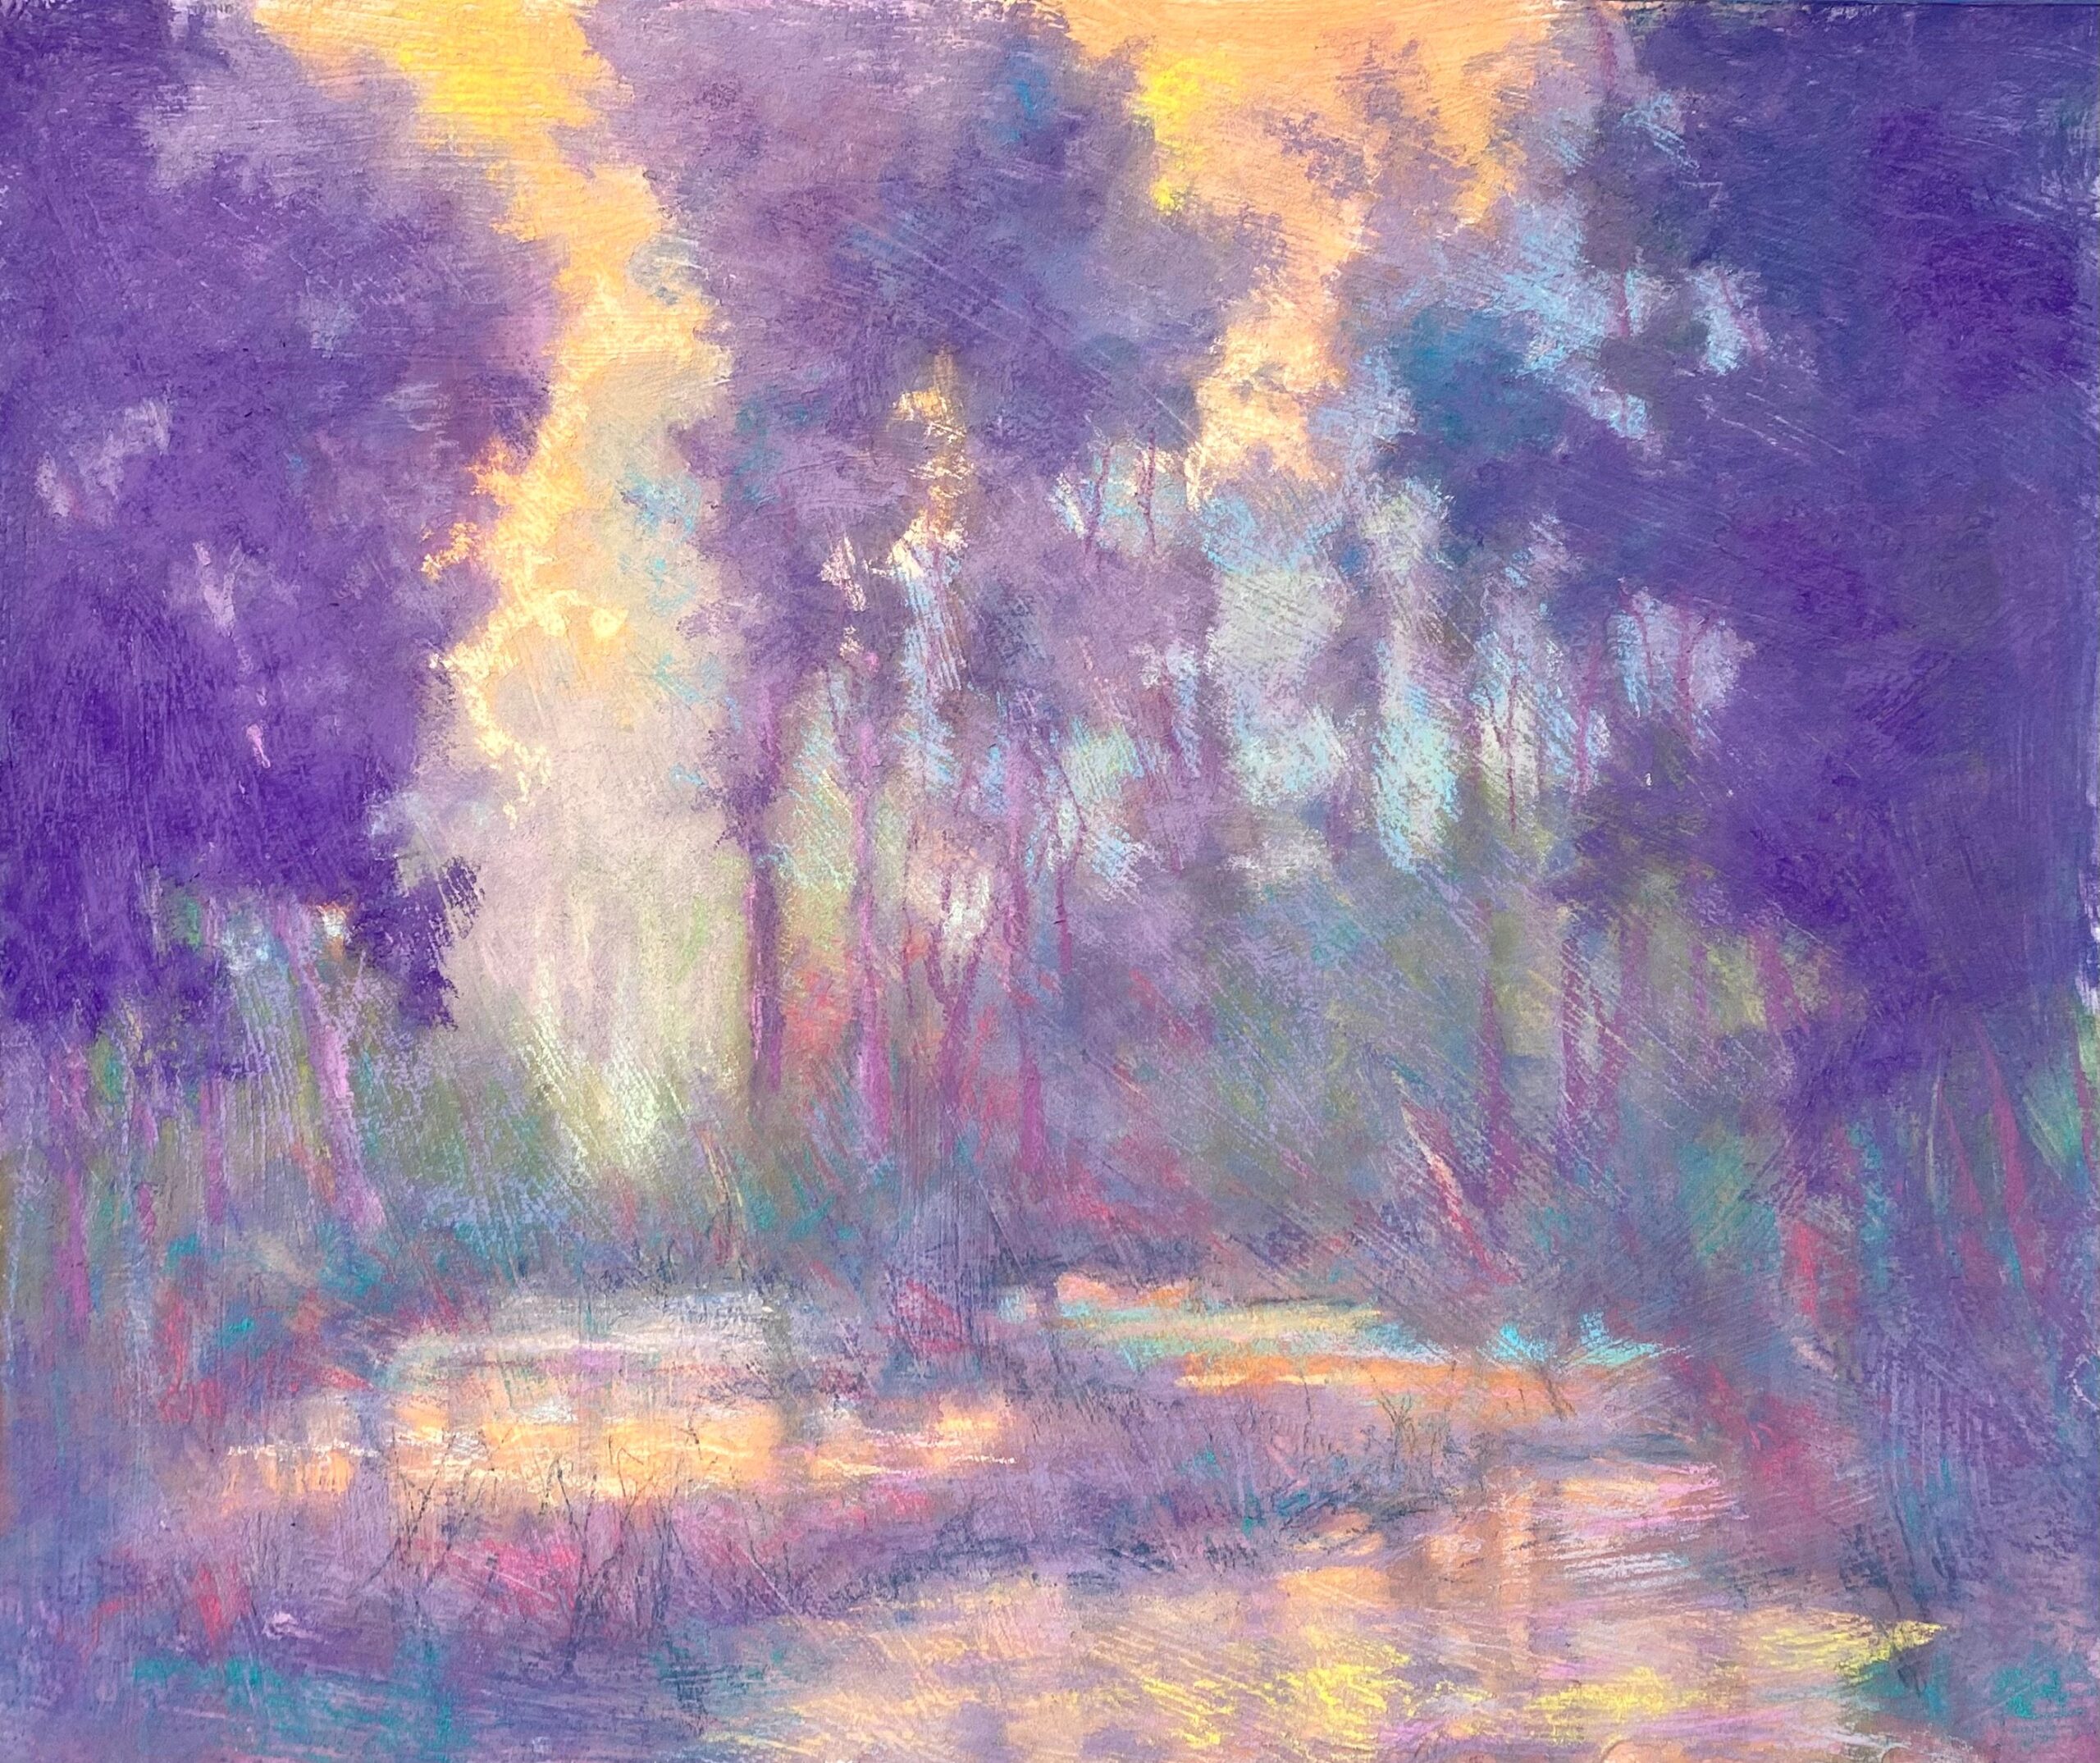 Landscape painting in pastel by Avon Waters